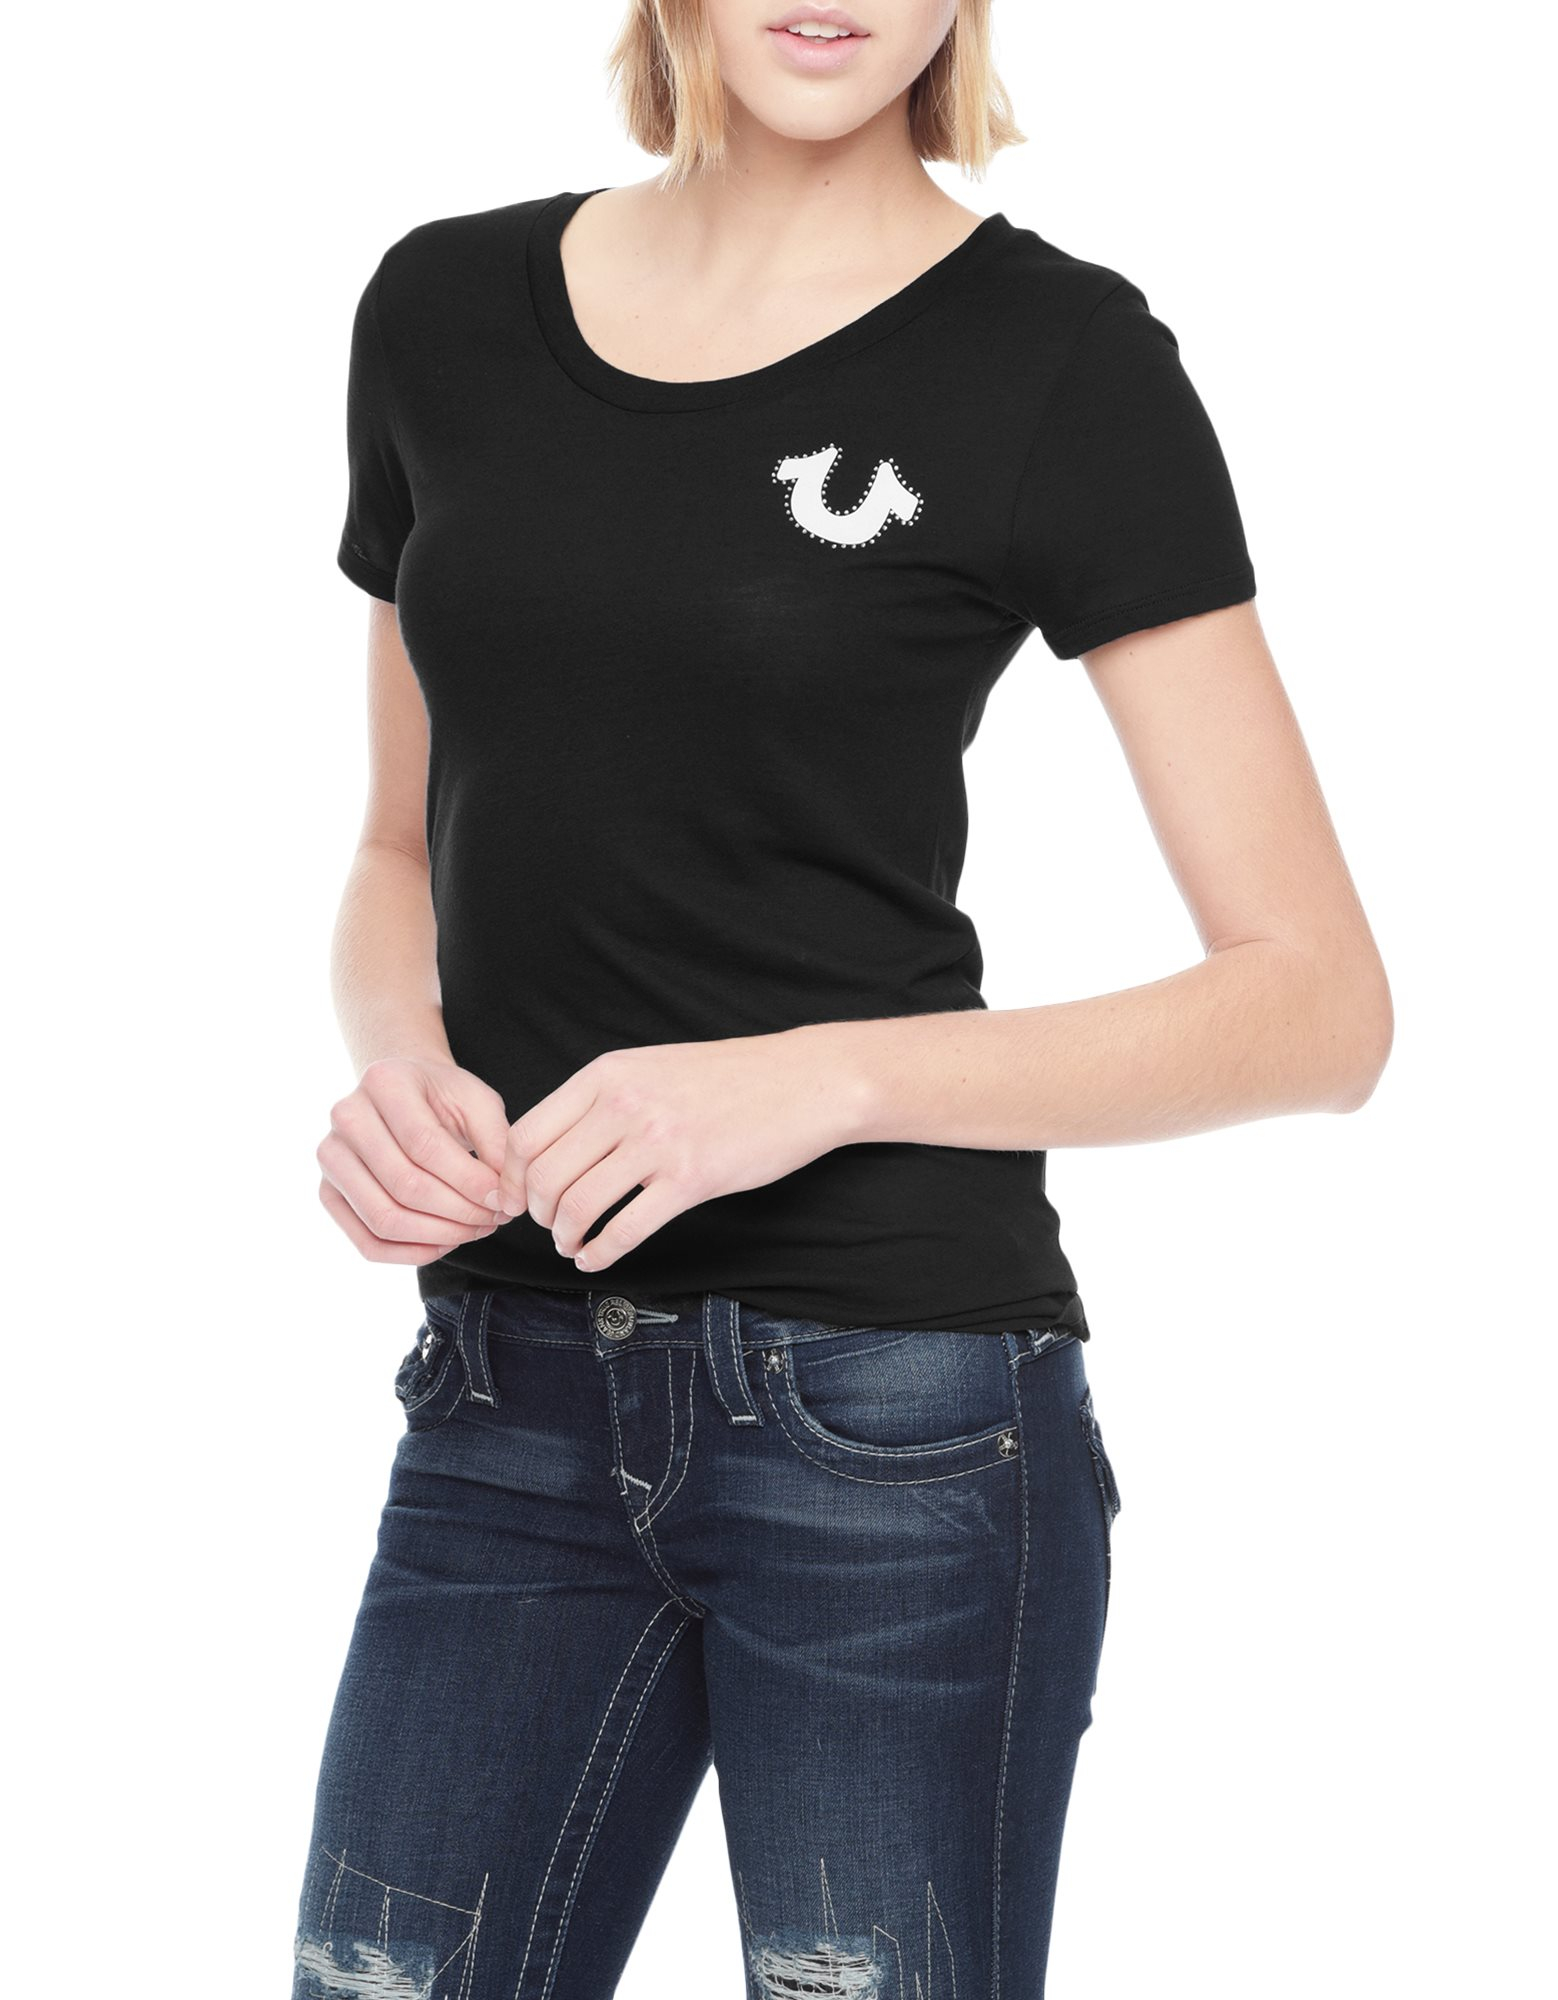 True Religion Crafted With Pride Crystal Womens T-Shirt in Black - Lyst